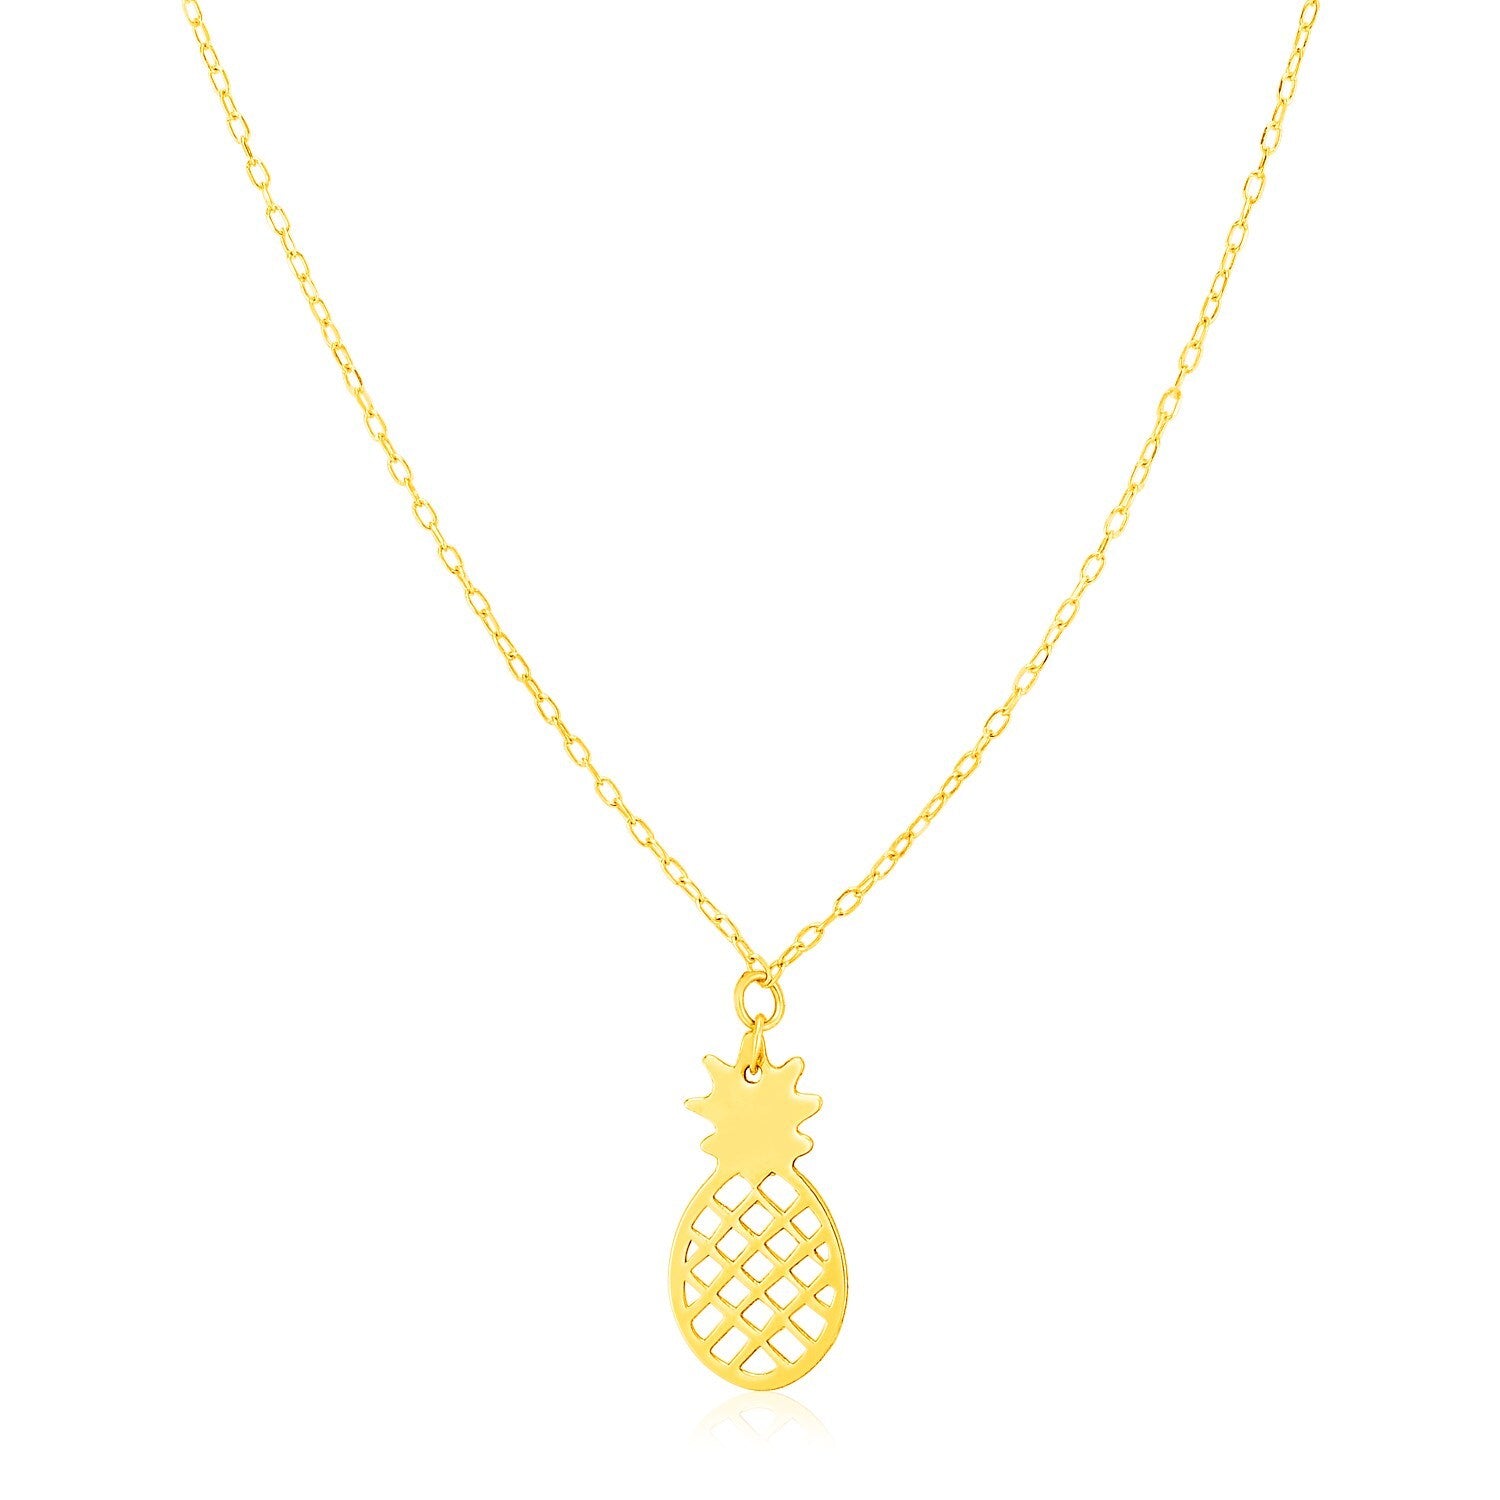 14K Yellow Gold Pineapple Necklace, size 18''